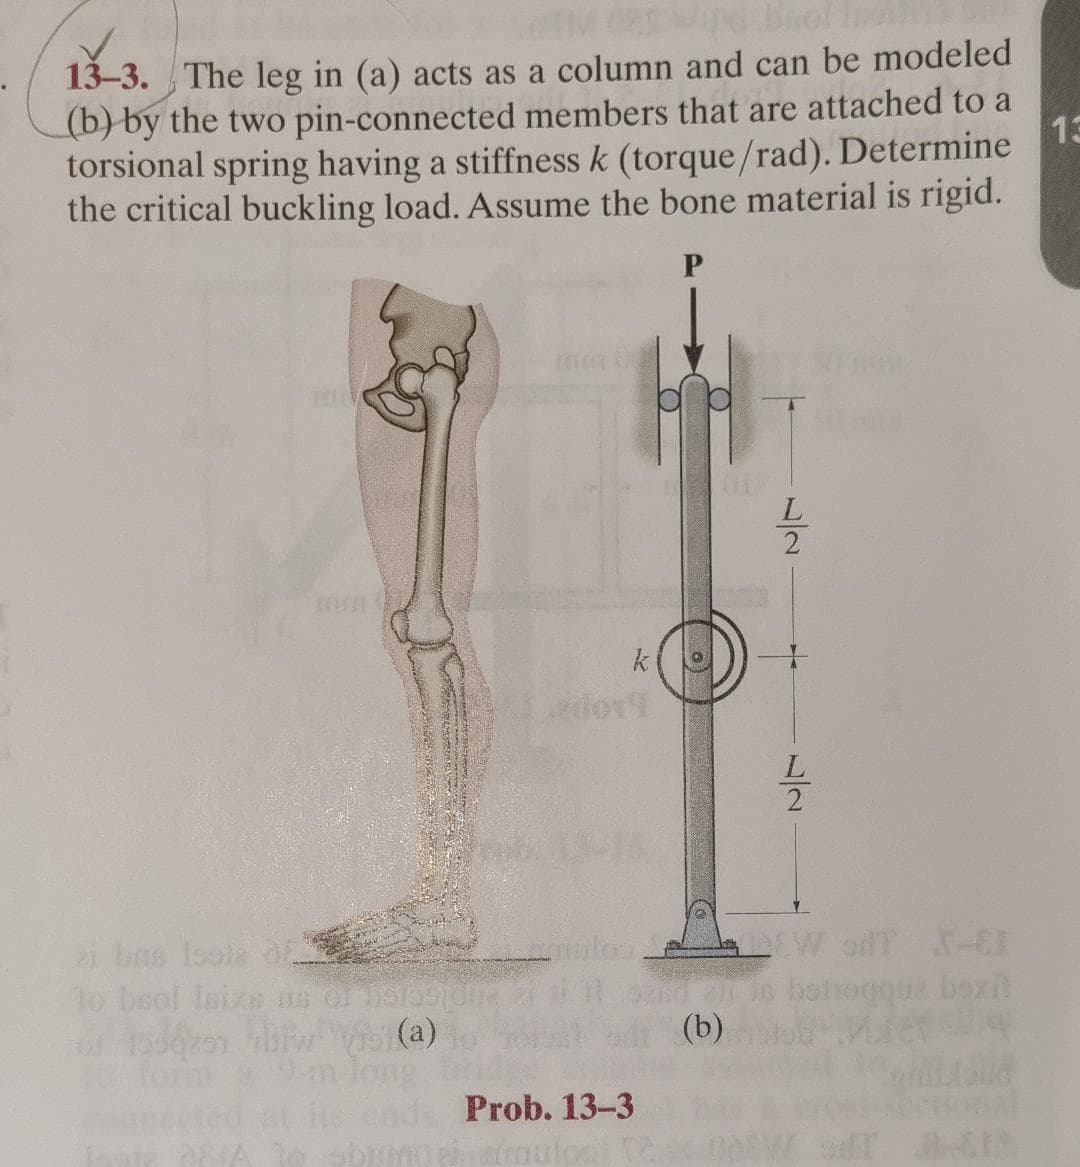 ✓
13-3. The leg in (a) acts as a column and can be modeled
(b) by the two pin-connected members that are attached to a
torsional spring having a stiffness k (torque/rad). Determine
the critical buckling load. Assume the bone material is rigid.
13
mun
10 bsol Isiza as of 59135(0
01 1590201 hfw Vist(a)
k
Prob. 13-3
mate A to sbhrmeiraulot 12
(0)
ET
(b)
72
W